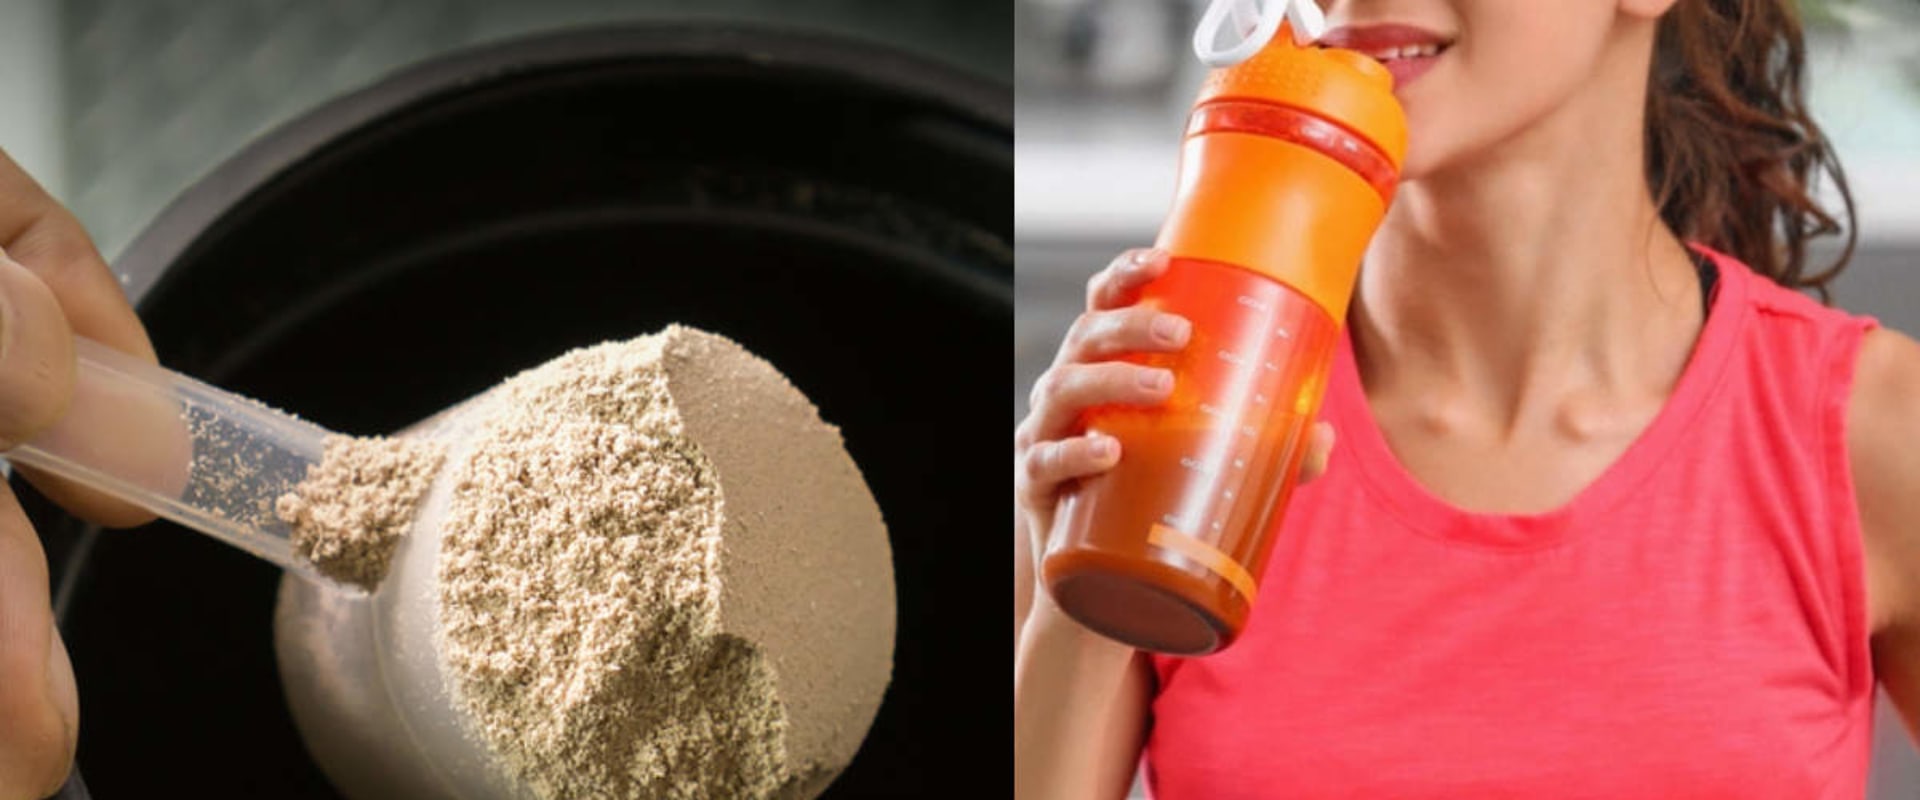 Can Breastfeeding Moms Safely Take Protein Powder?